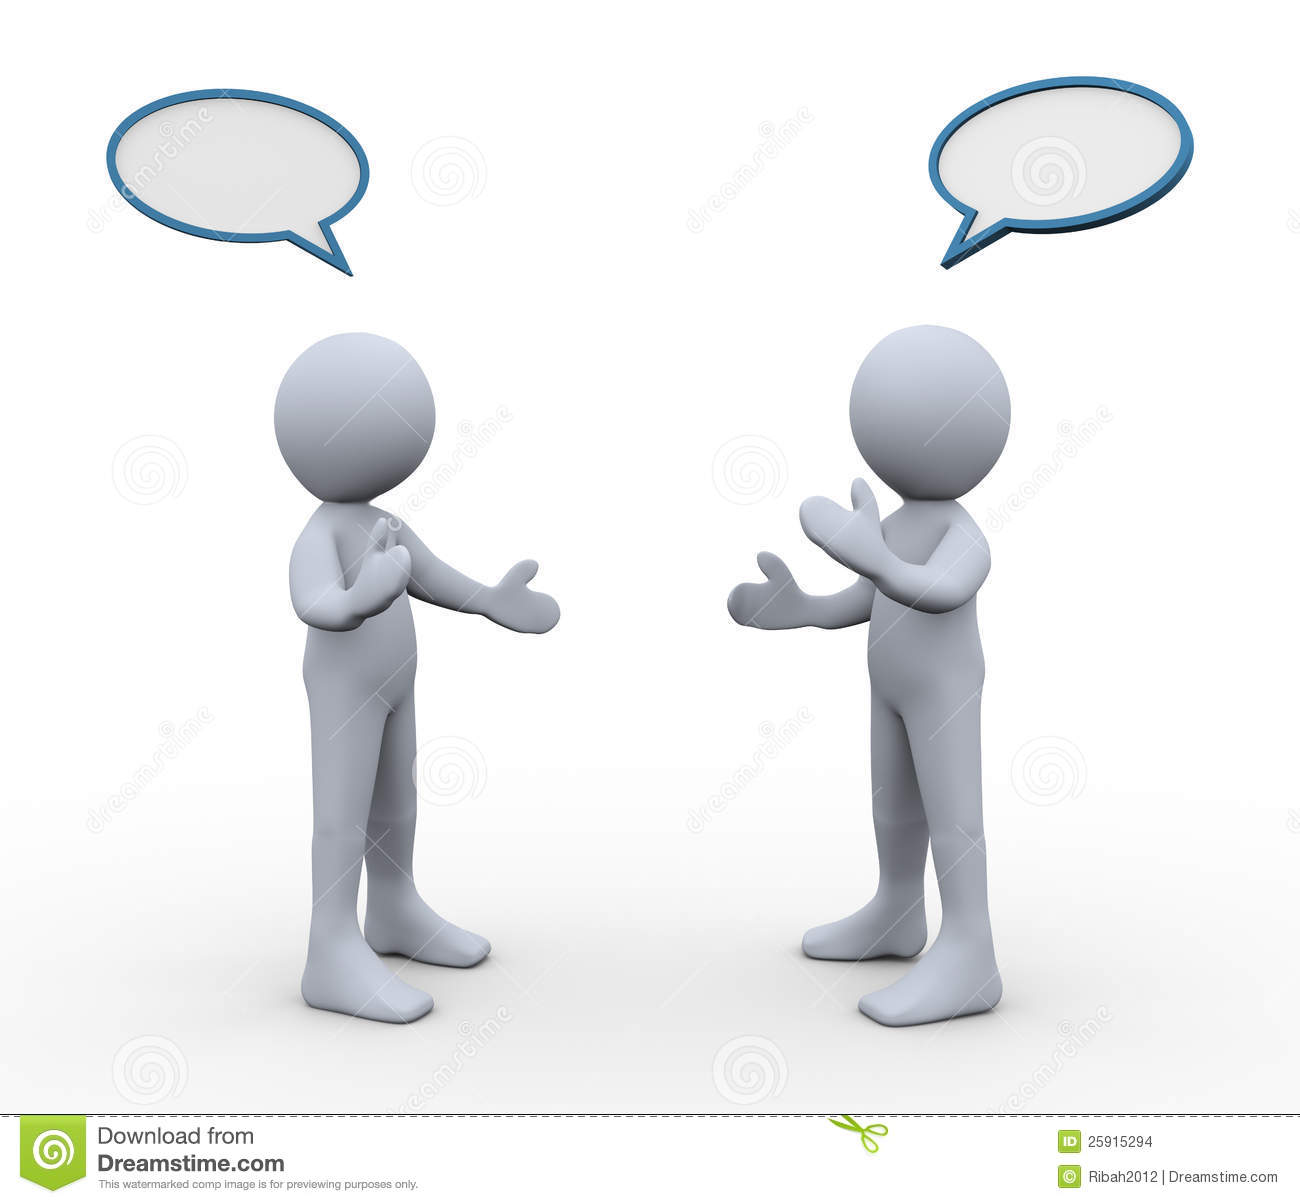 3d Illustration Of Men With Bubble Speech Talking To Each Other  3d